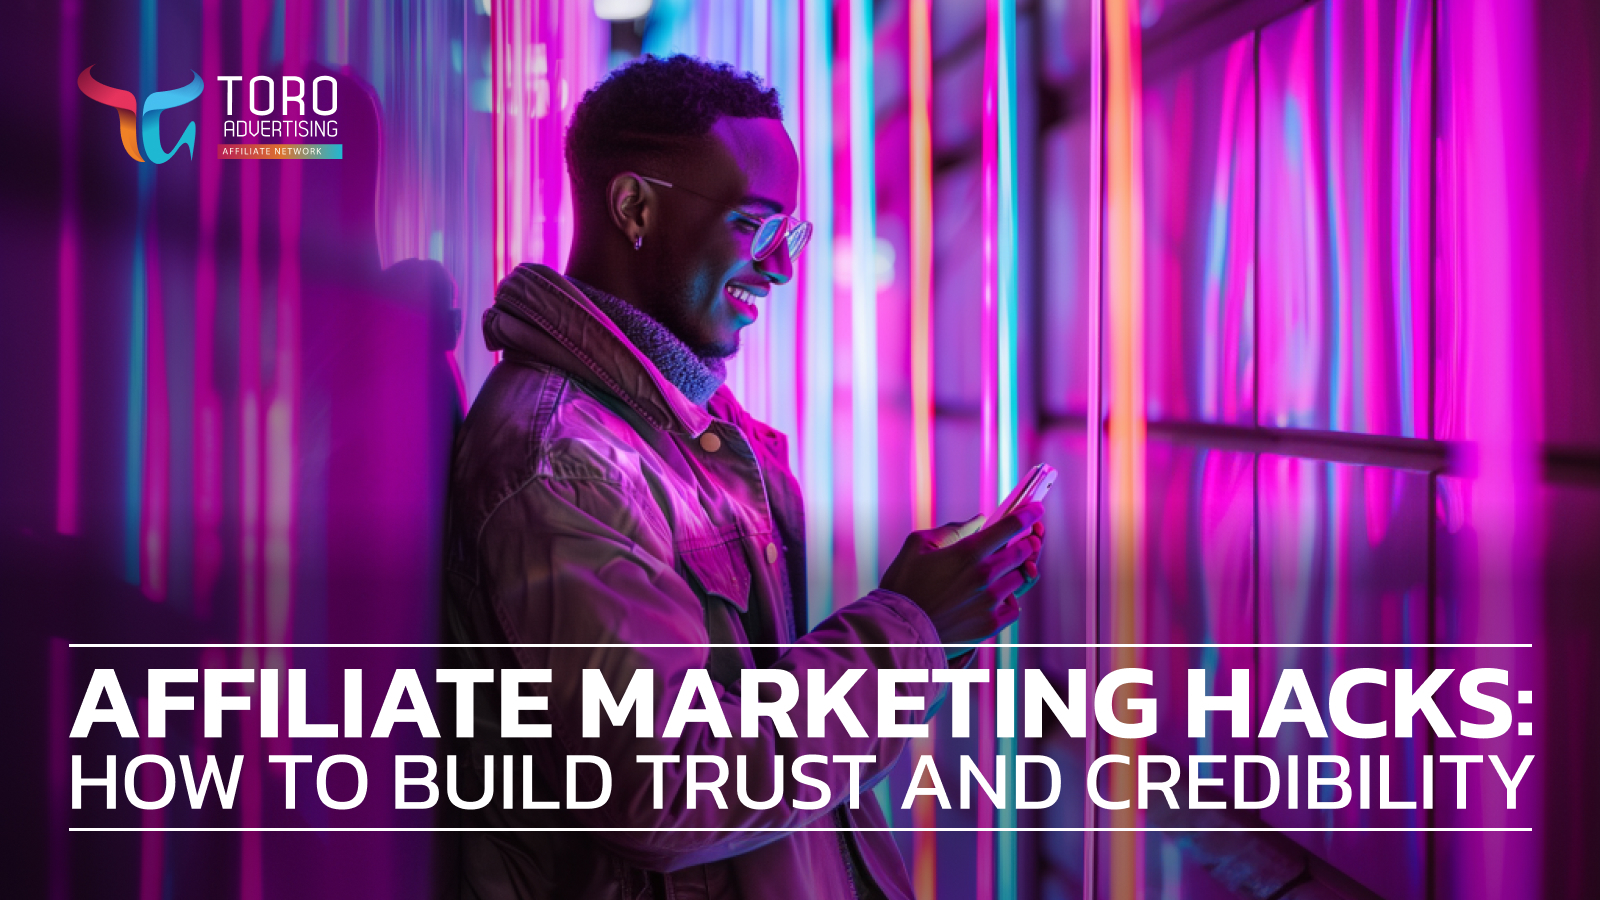 Affilaite Marketing Hacks: Building trust and credibility in affiliate marketing